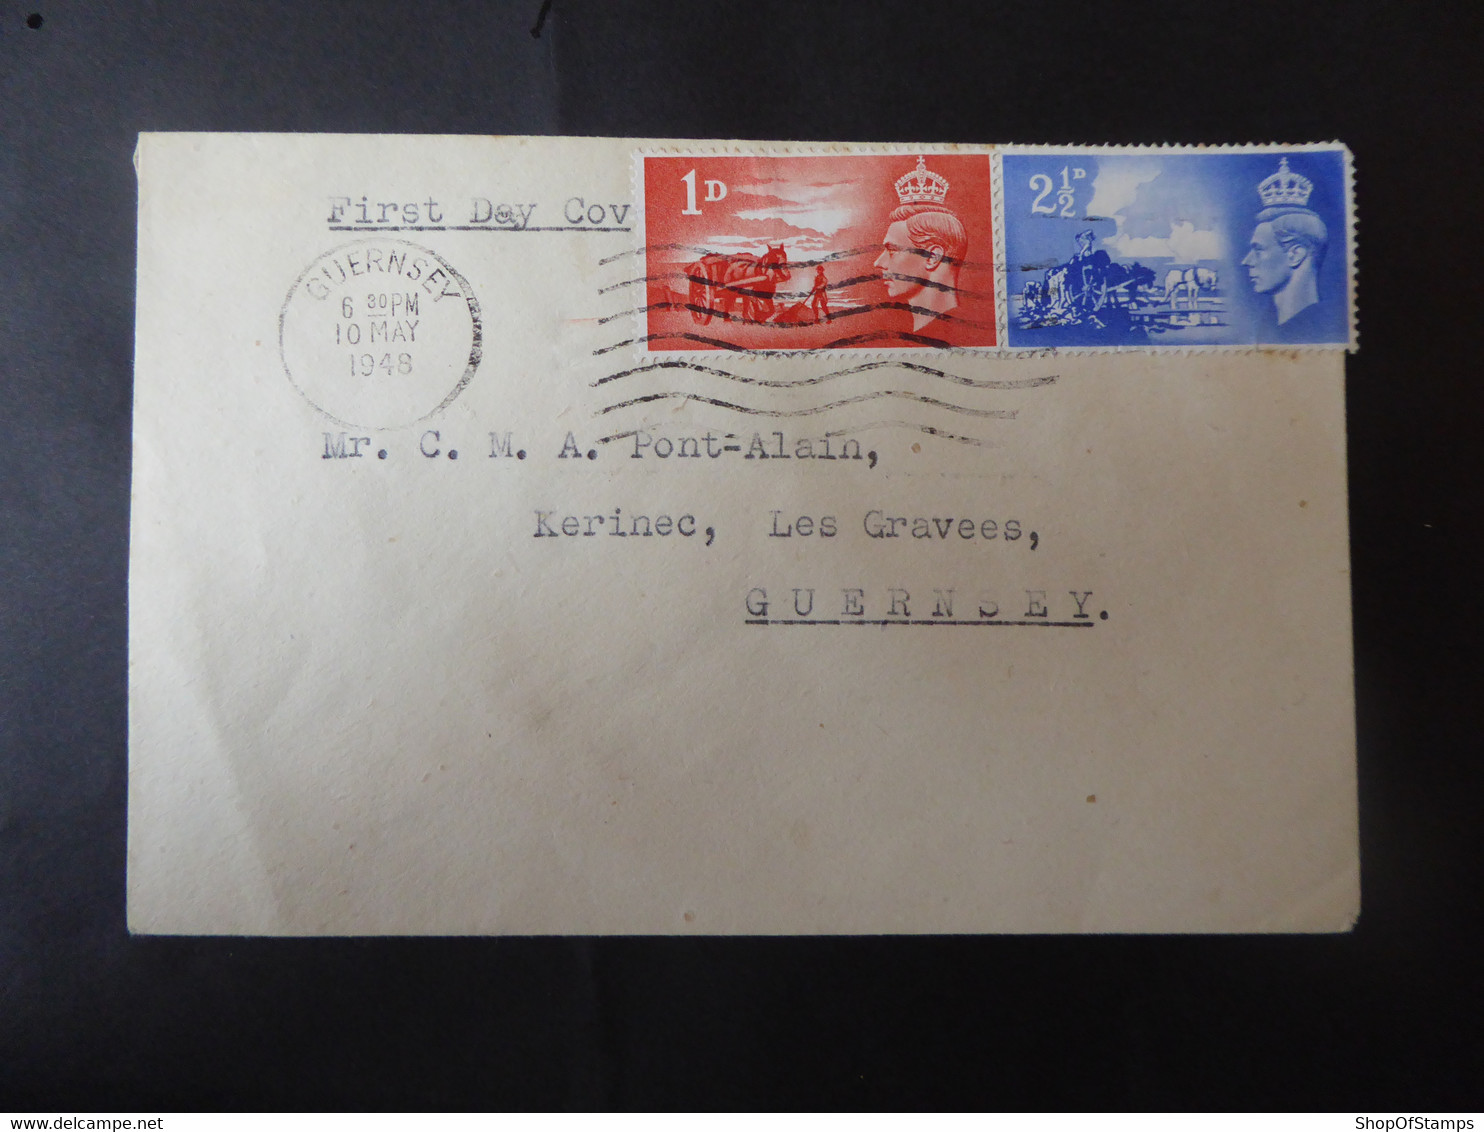 CHANNEL ISLANDS SG C1-2 FDC WITH POSTMARK GUERNSEY 10 MAY 1942 - Non Classés